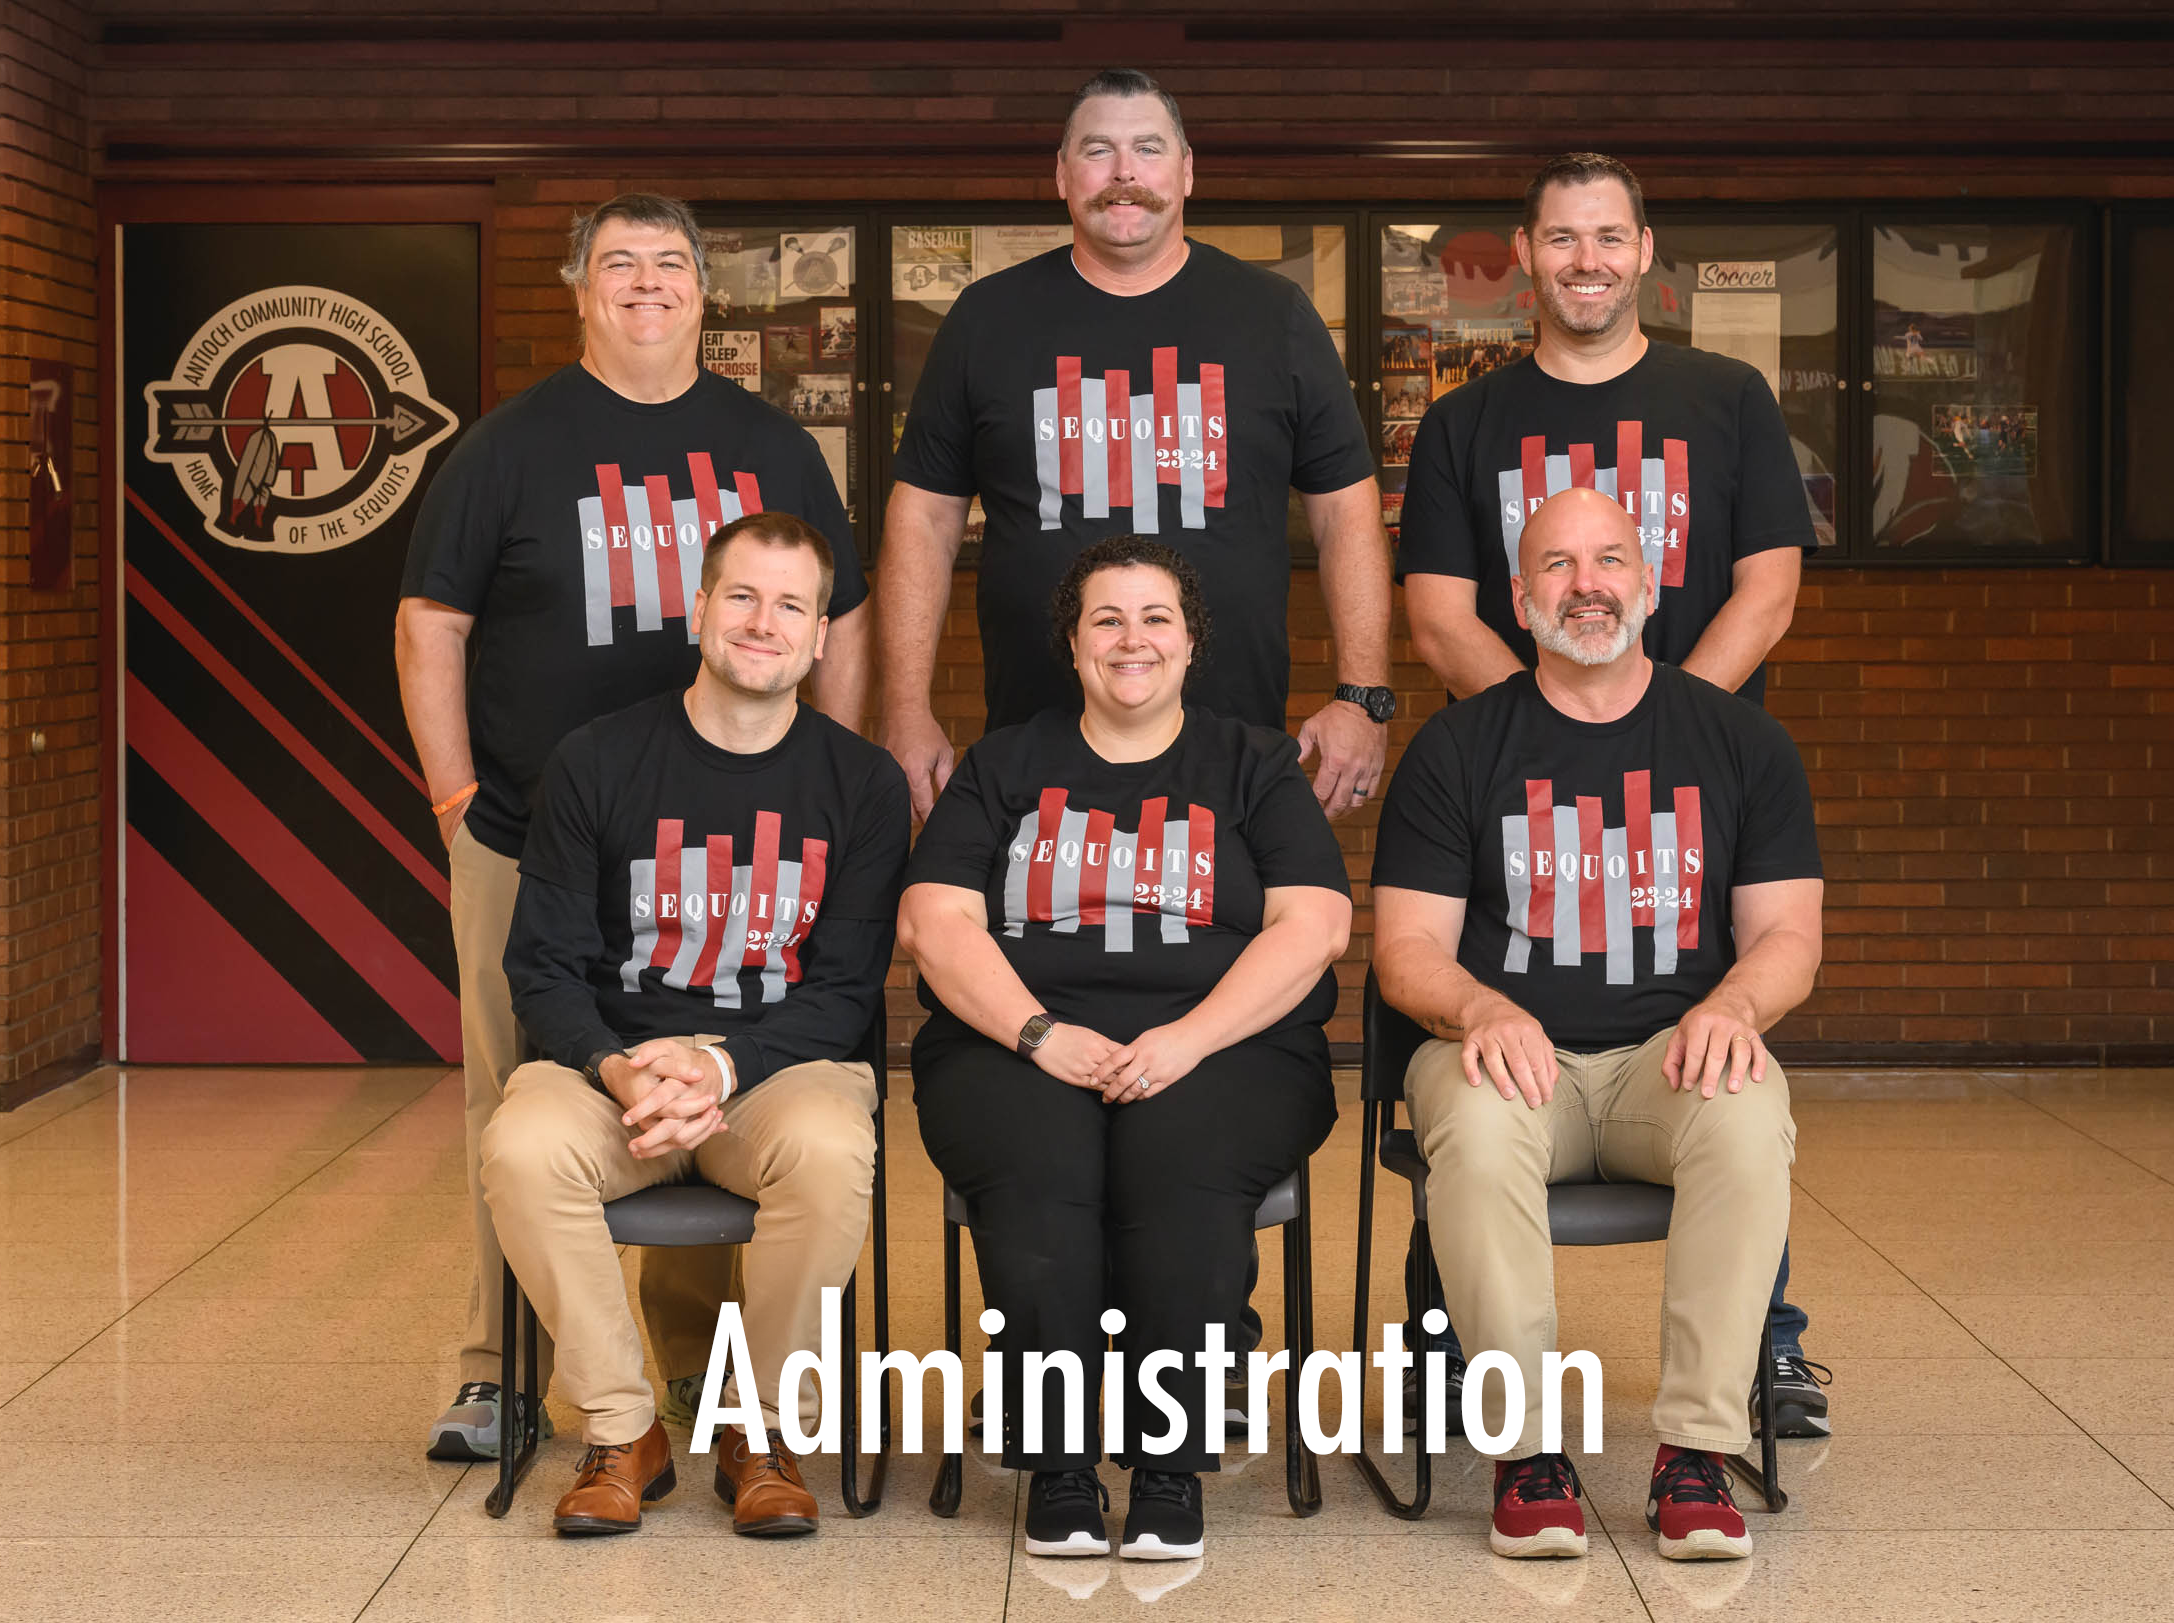 ADMINISTRATION: Fall 2022